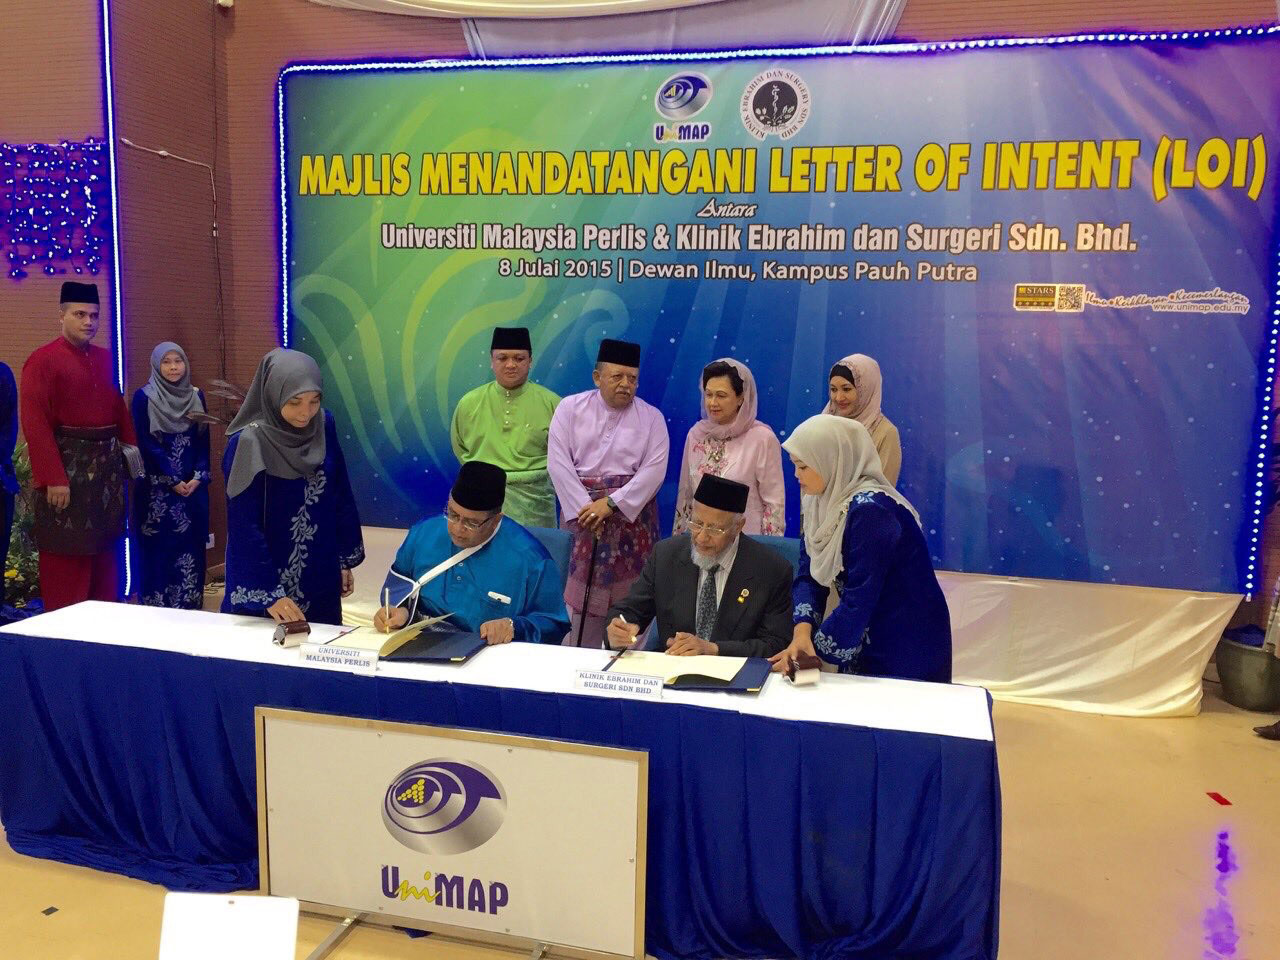 Agreement signed in the presence of His Excellency the Raja Perlis